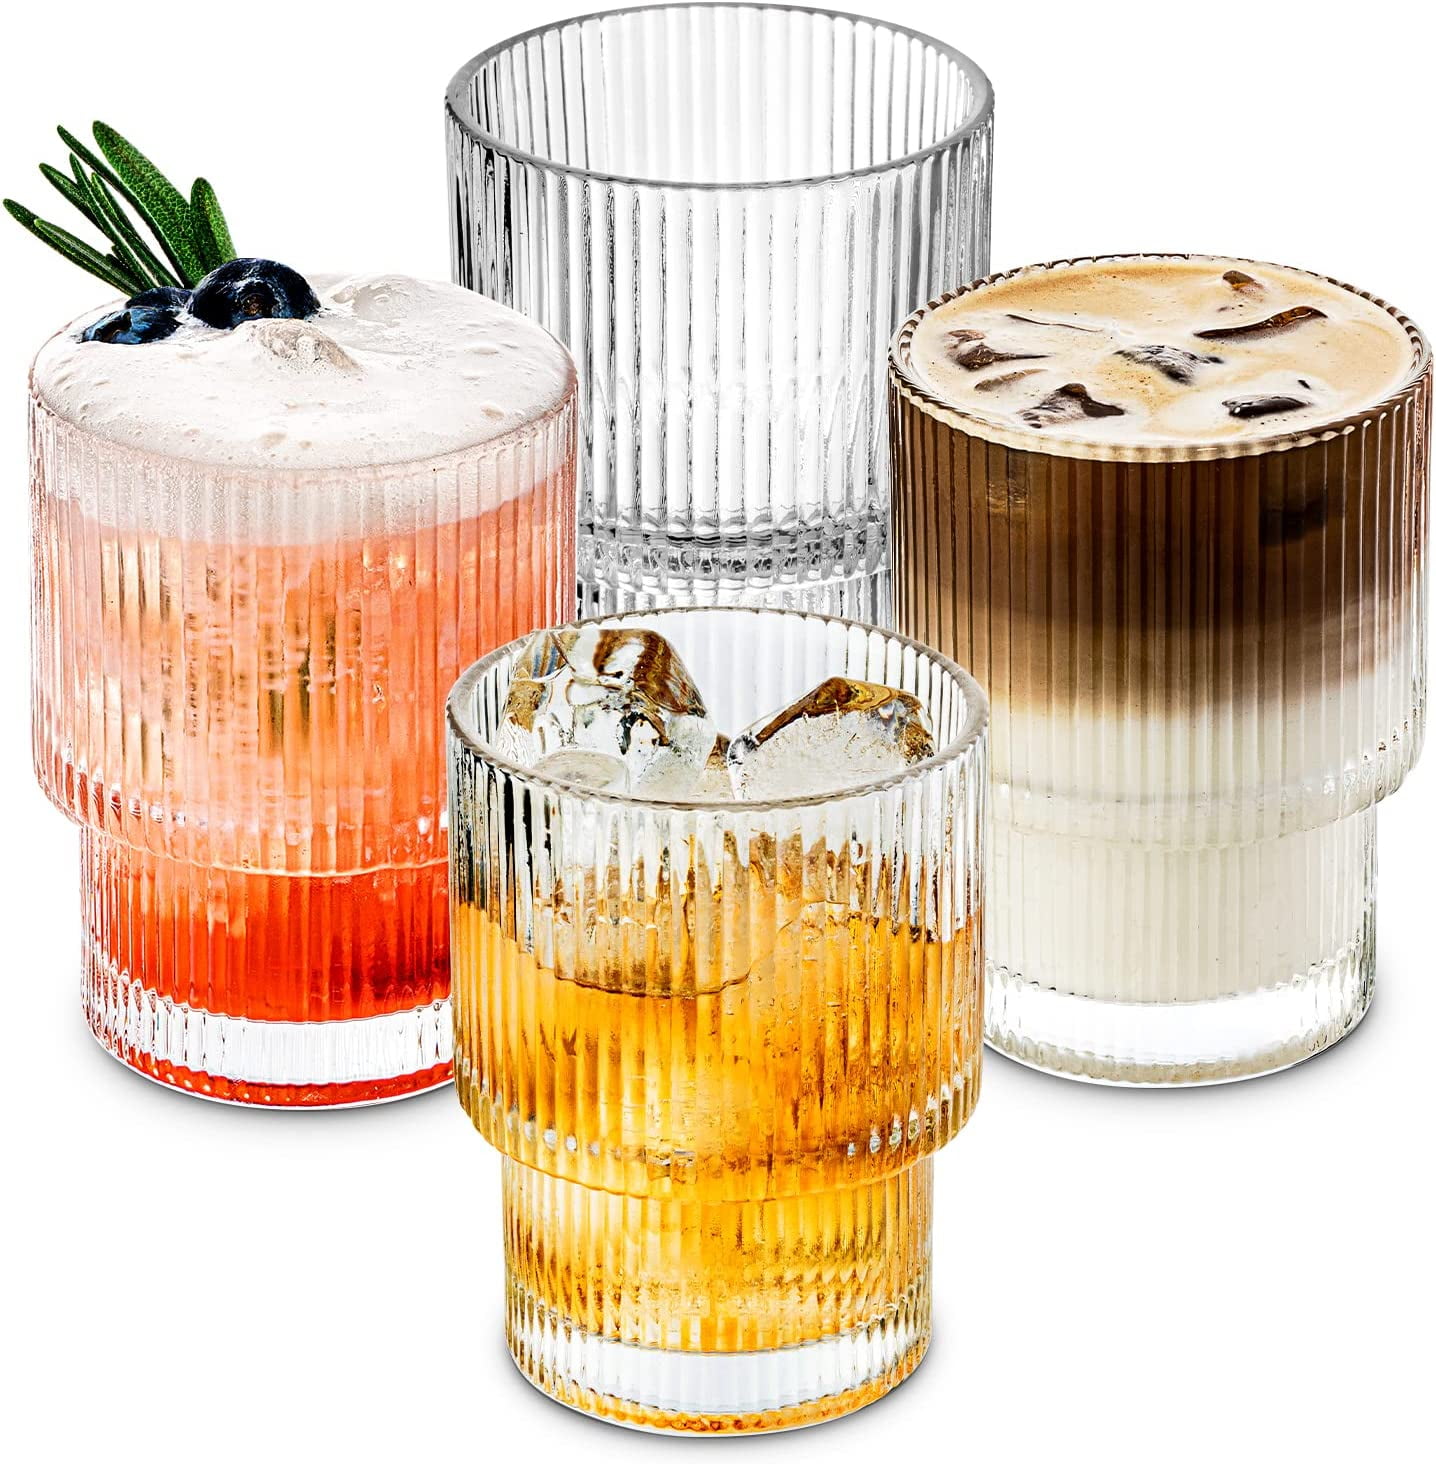 Combler Ribbed Glasses Drinking Set of 8, 4pcs 11oz Glass Cups with Straws  & 4pcs 6oz Cute Cocktail …See more Combler Ribbed Glasses Drinking Set of